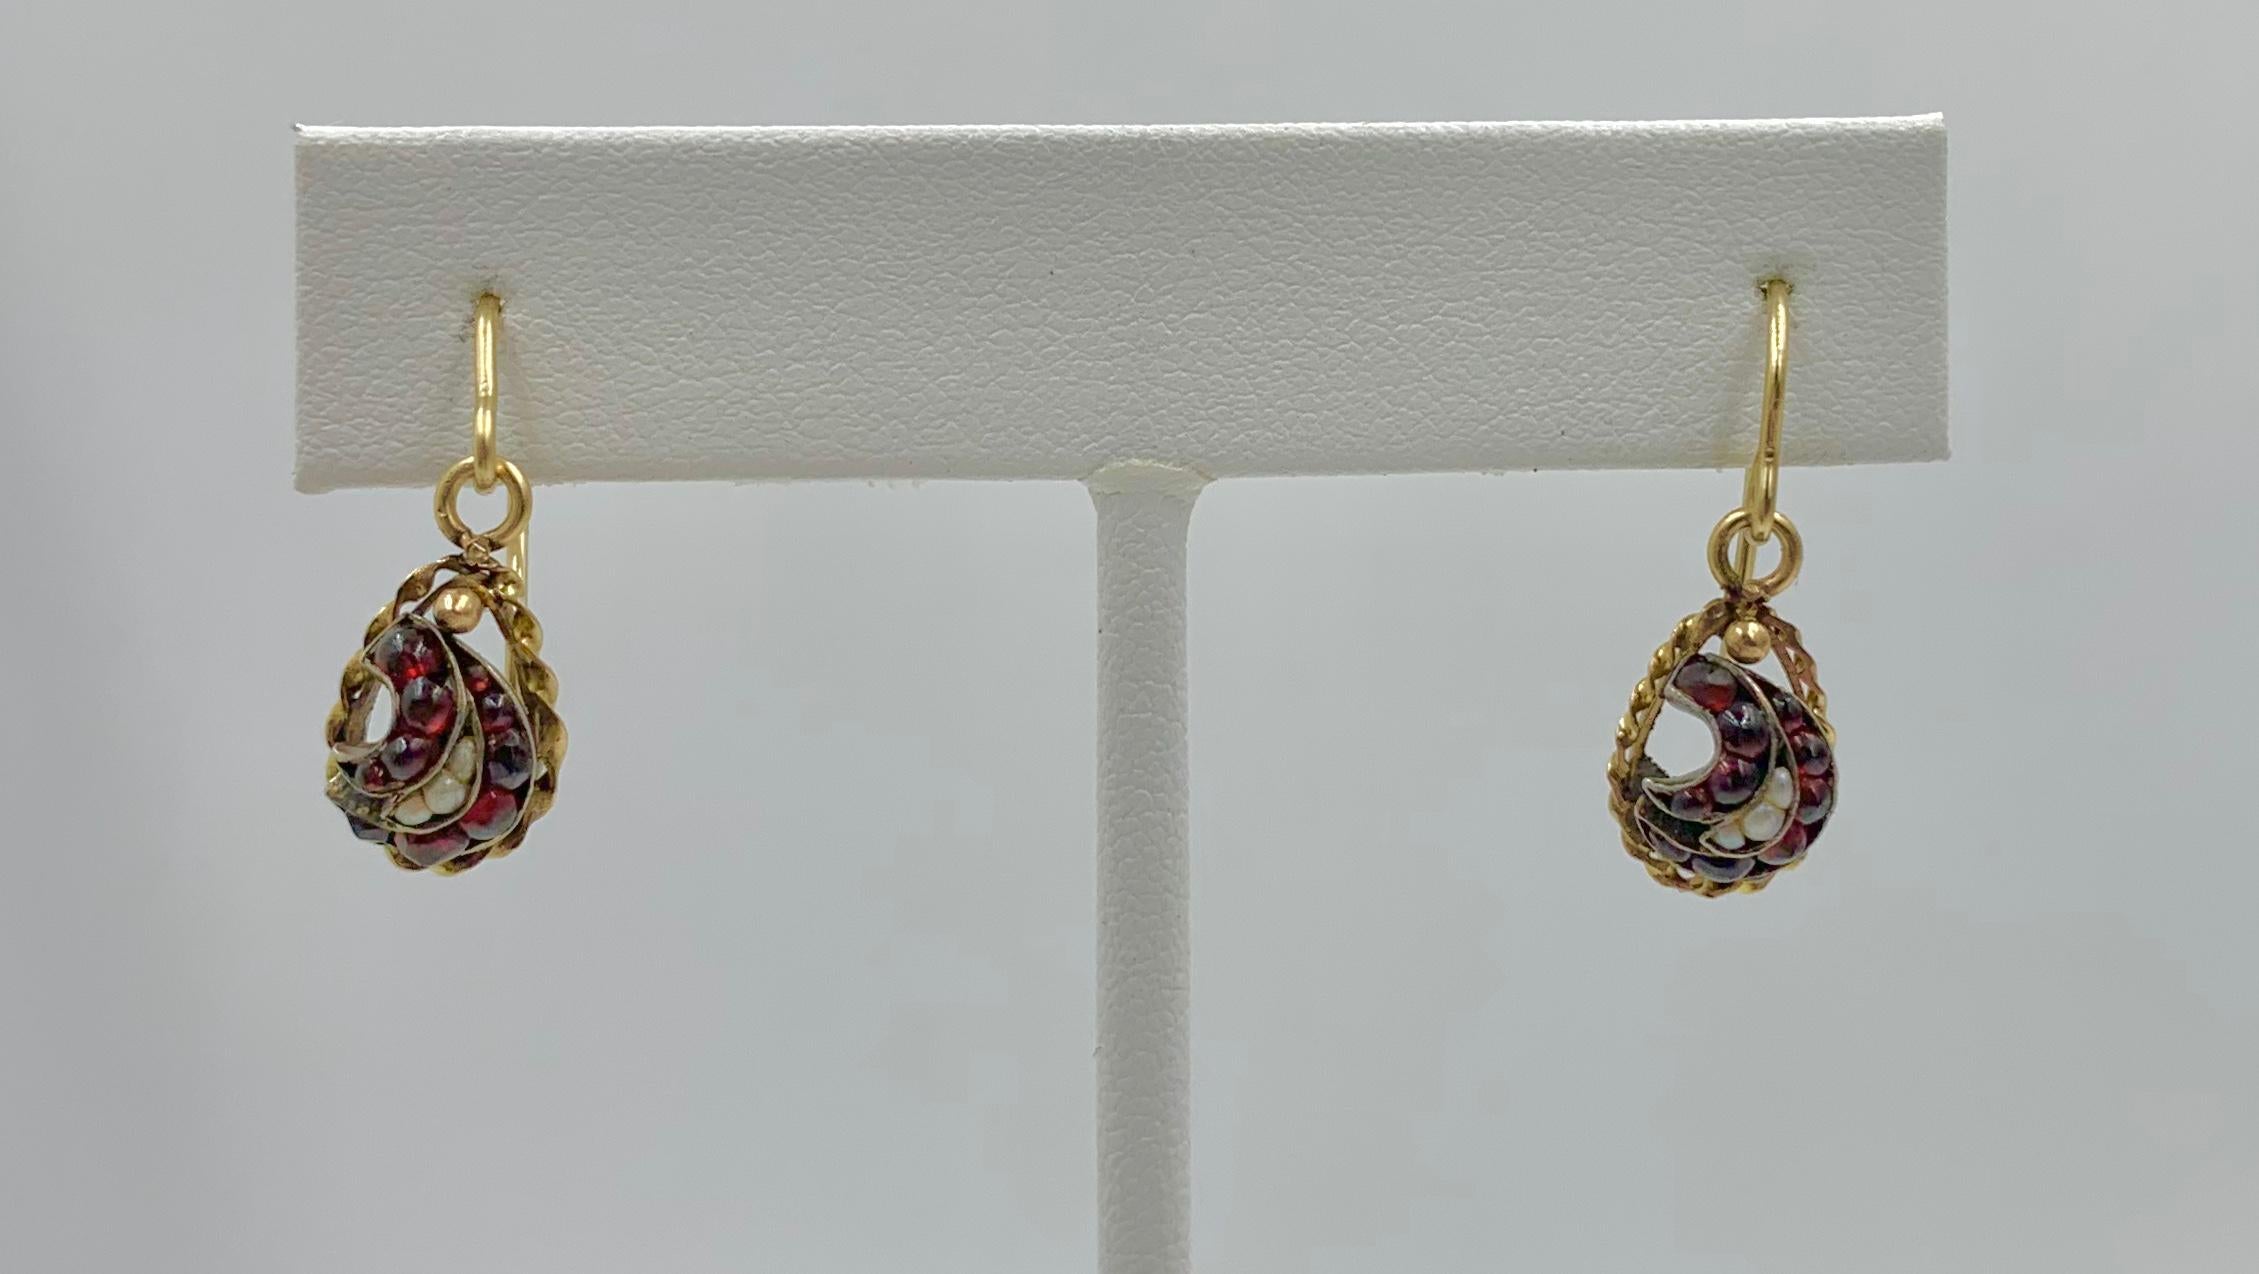 This is a rare pair of Victorian Bohemian Garnet and Pearl Dangle Drop Earrings in 10 Karat Gold.  The exquisite earrings have a swirl motif design set with gorgeous Bohemian Garnet cabochons with Pearl accents.  The lovely jewels are set in a 10